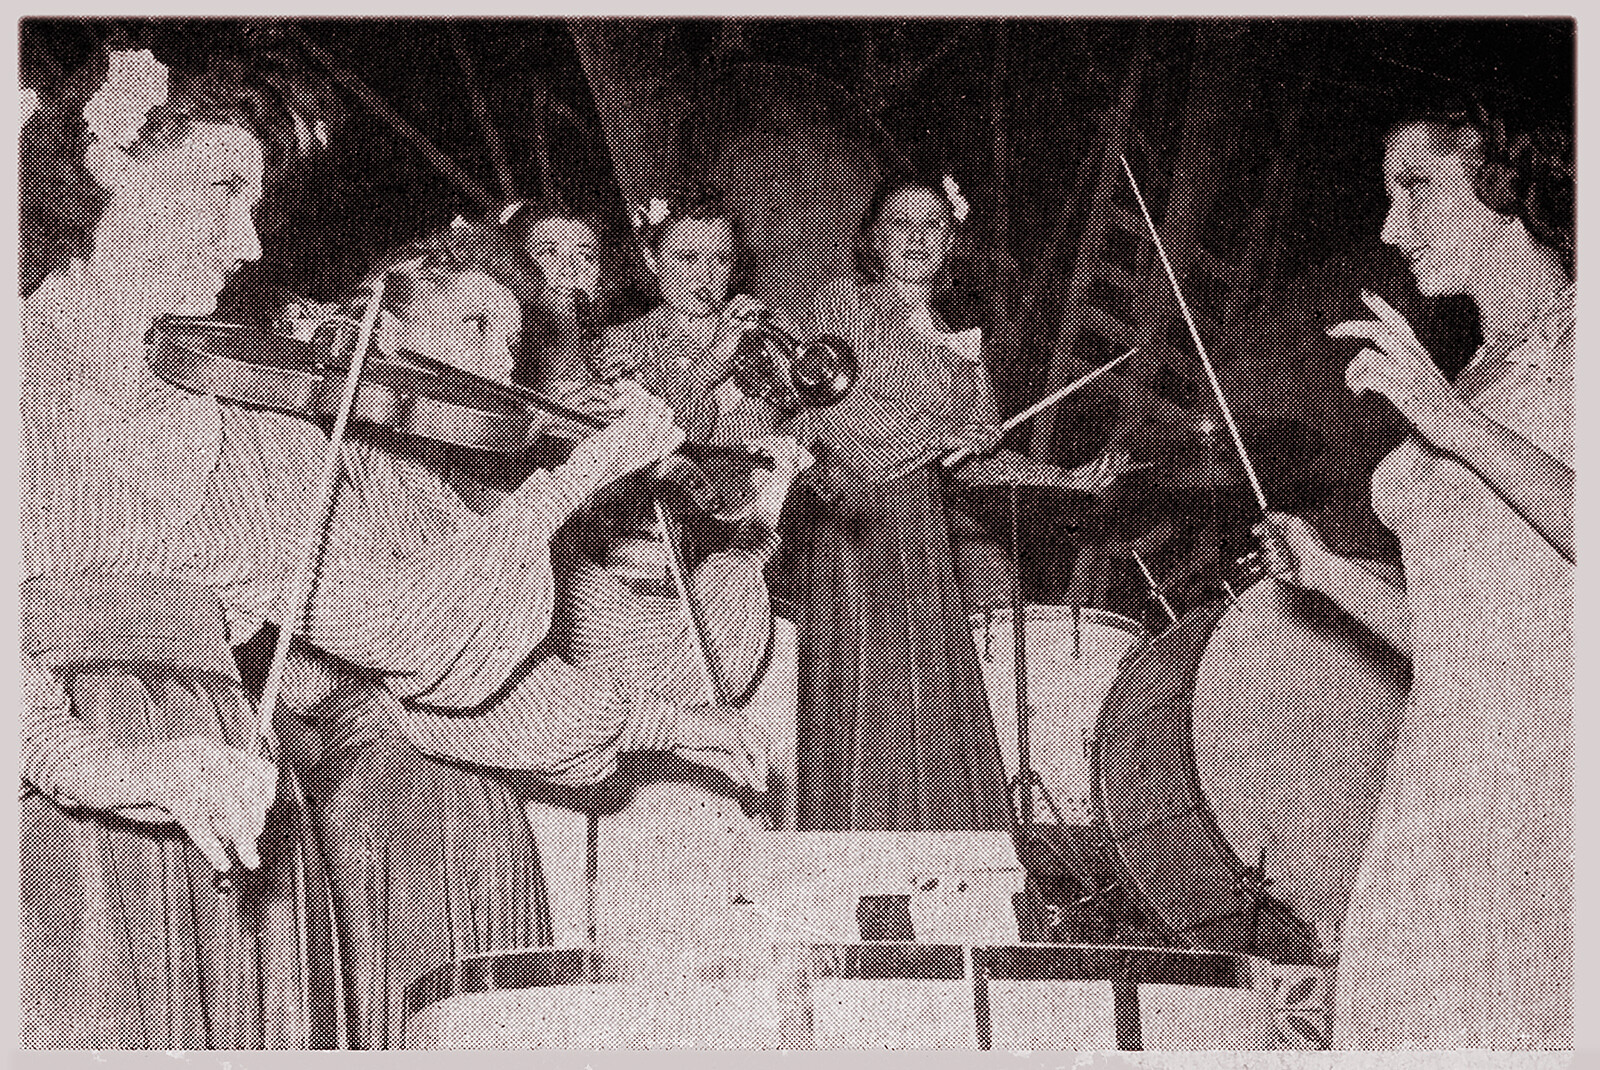 Ada Leonard and the All-American Girl Orchestra, Part One 1940-43